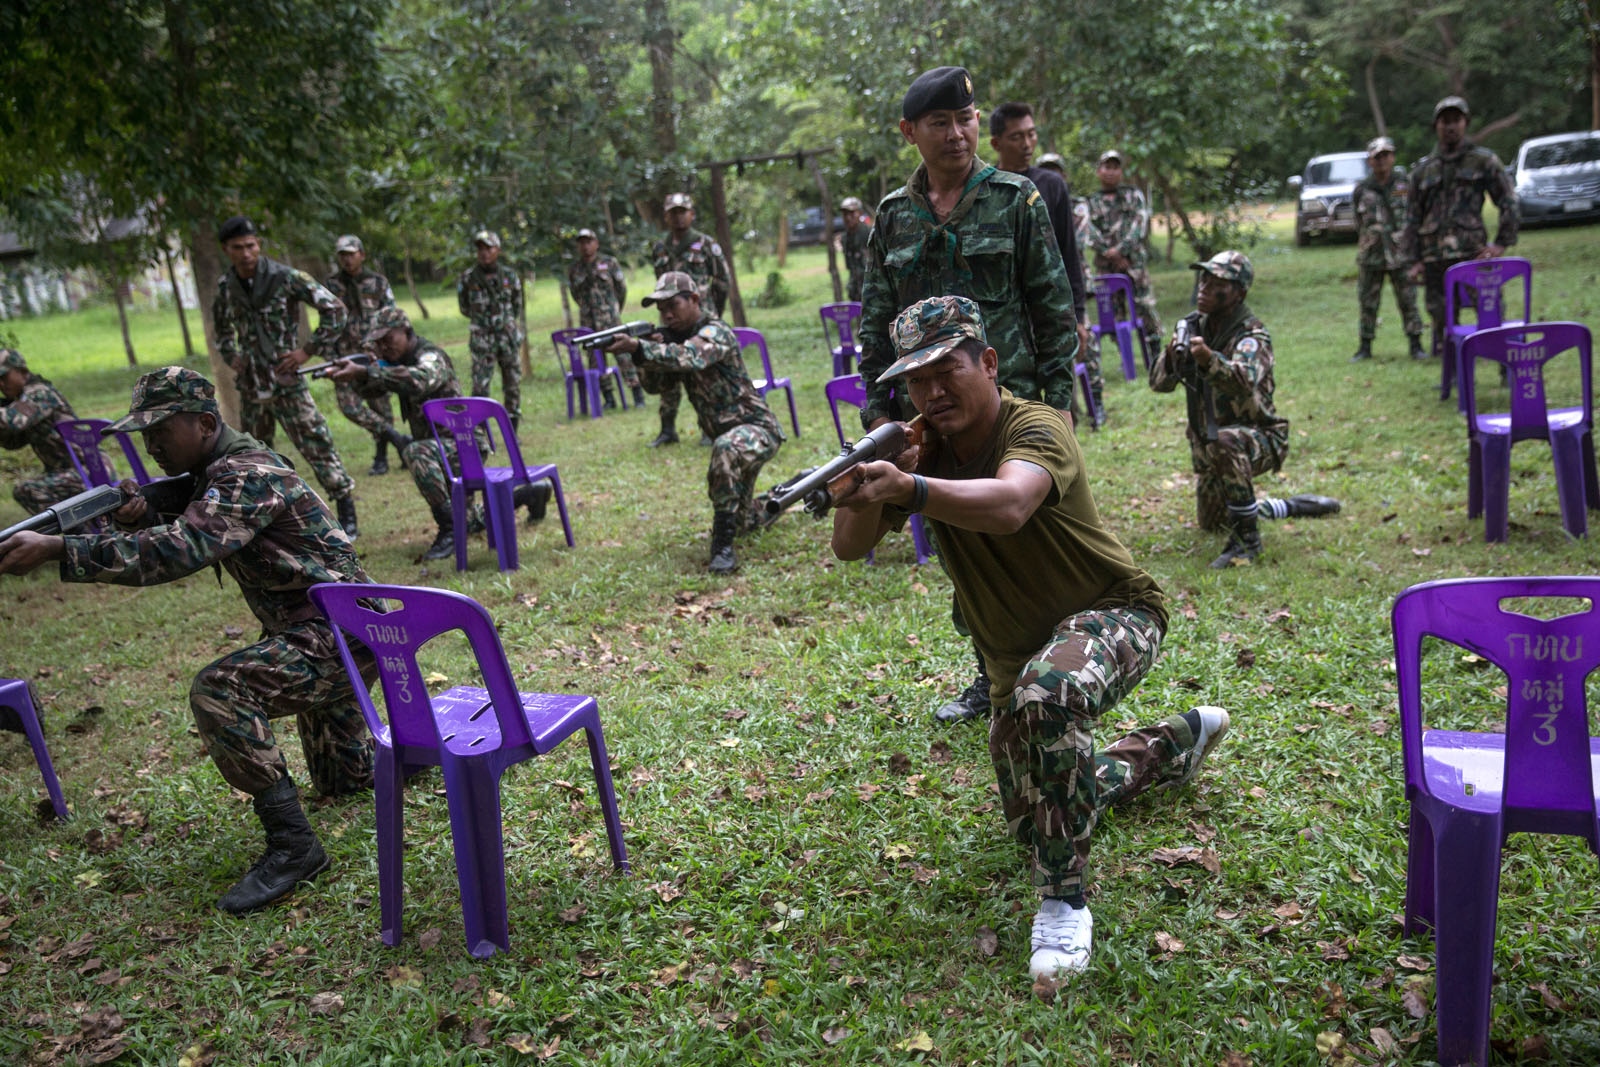 PROTECTING THAILANDS ROSEWOOD - New forest ranger recruits have weapons training as part...